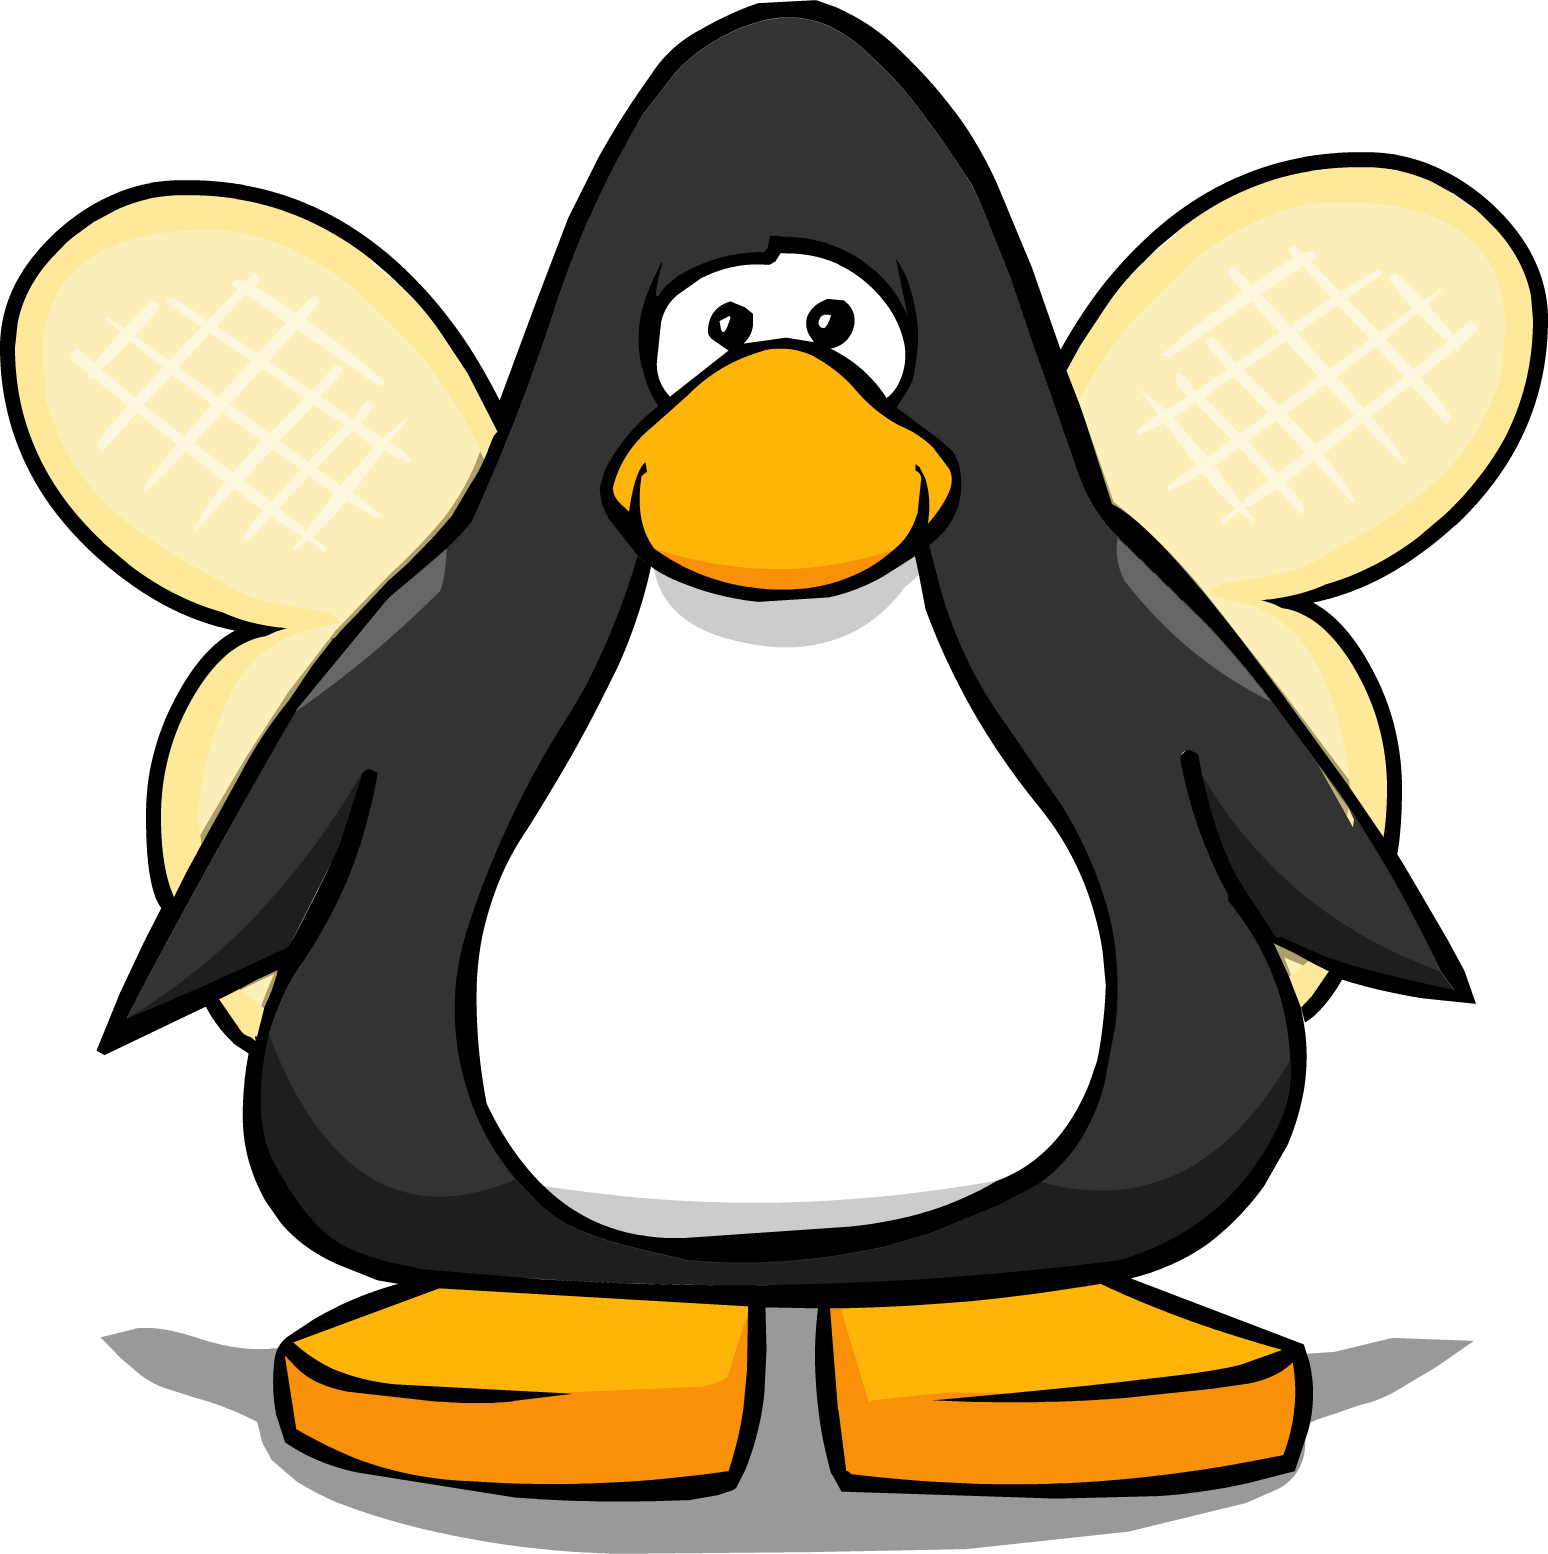 Bee Wings From A Player Card - Club Penguin Black Belt (1548x1554)